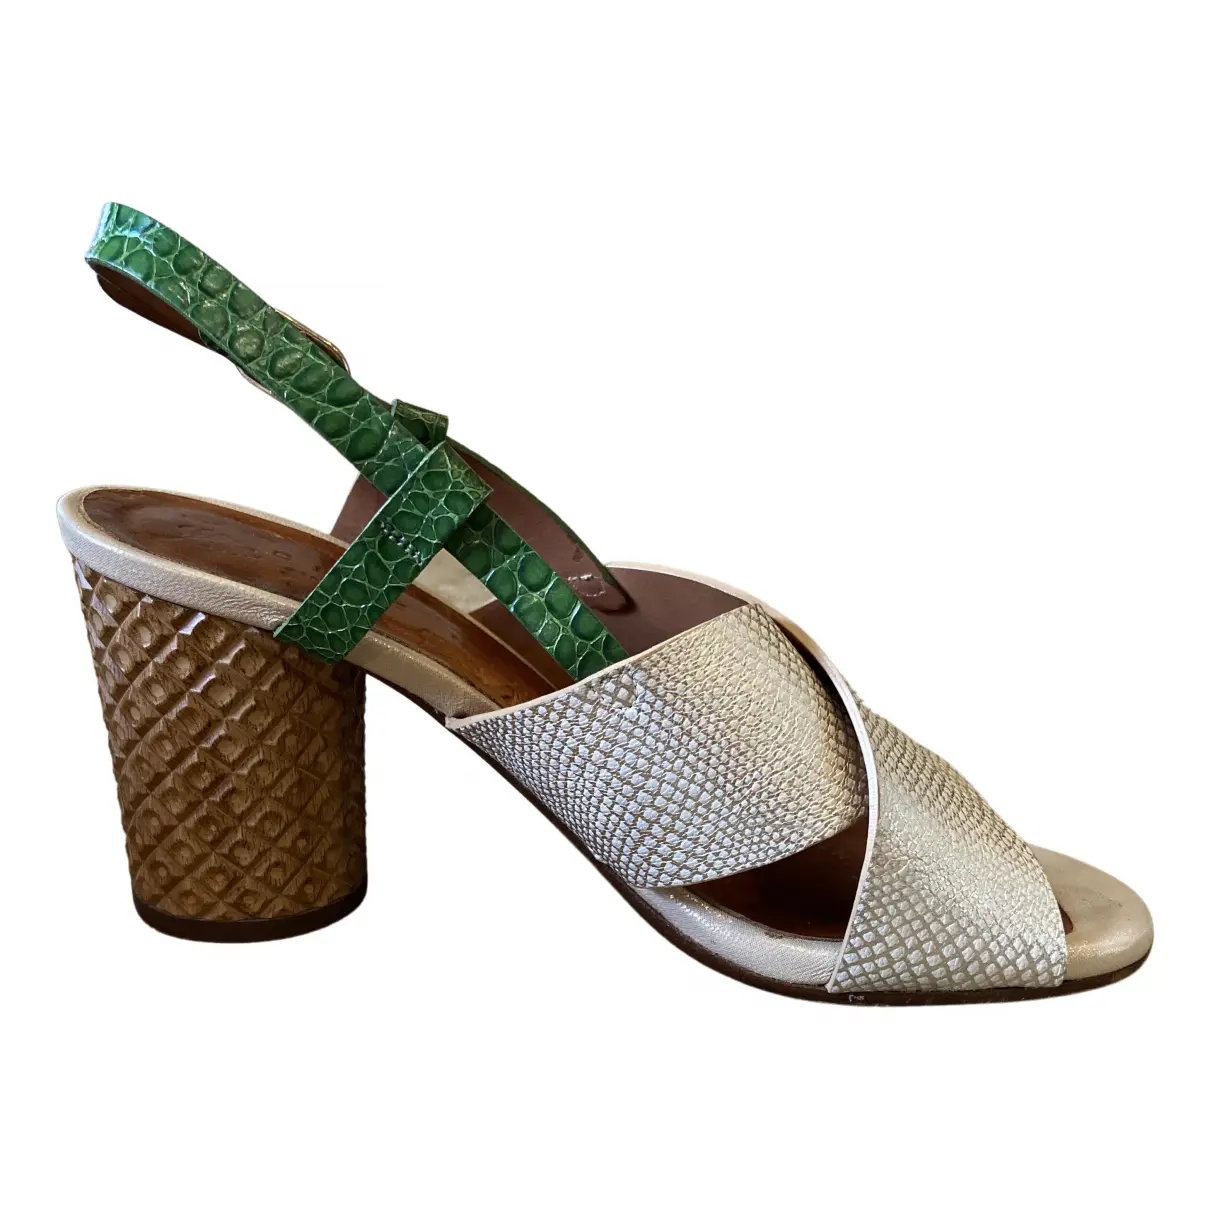 Leather sandal Chie Mihara